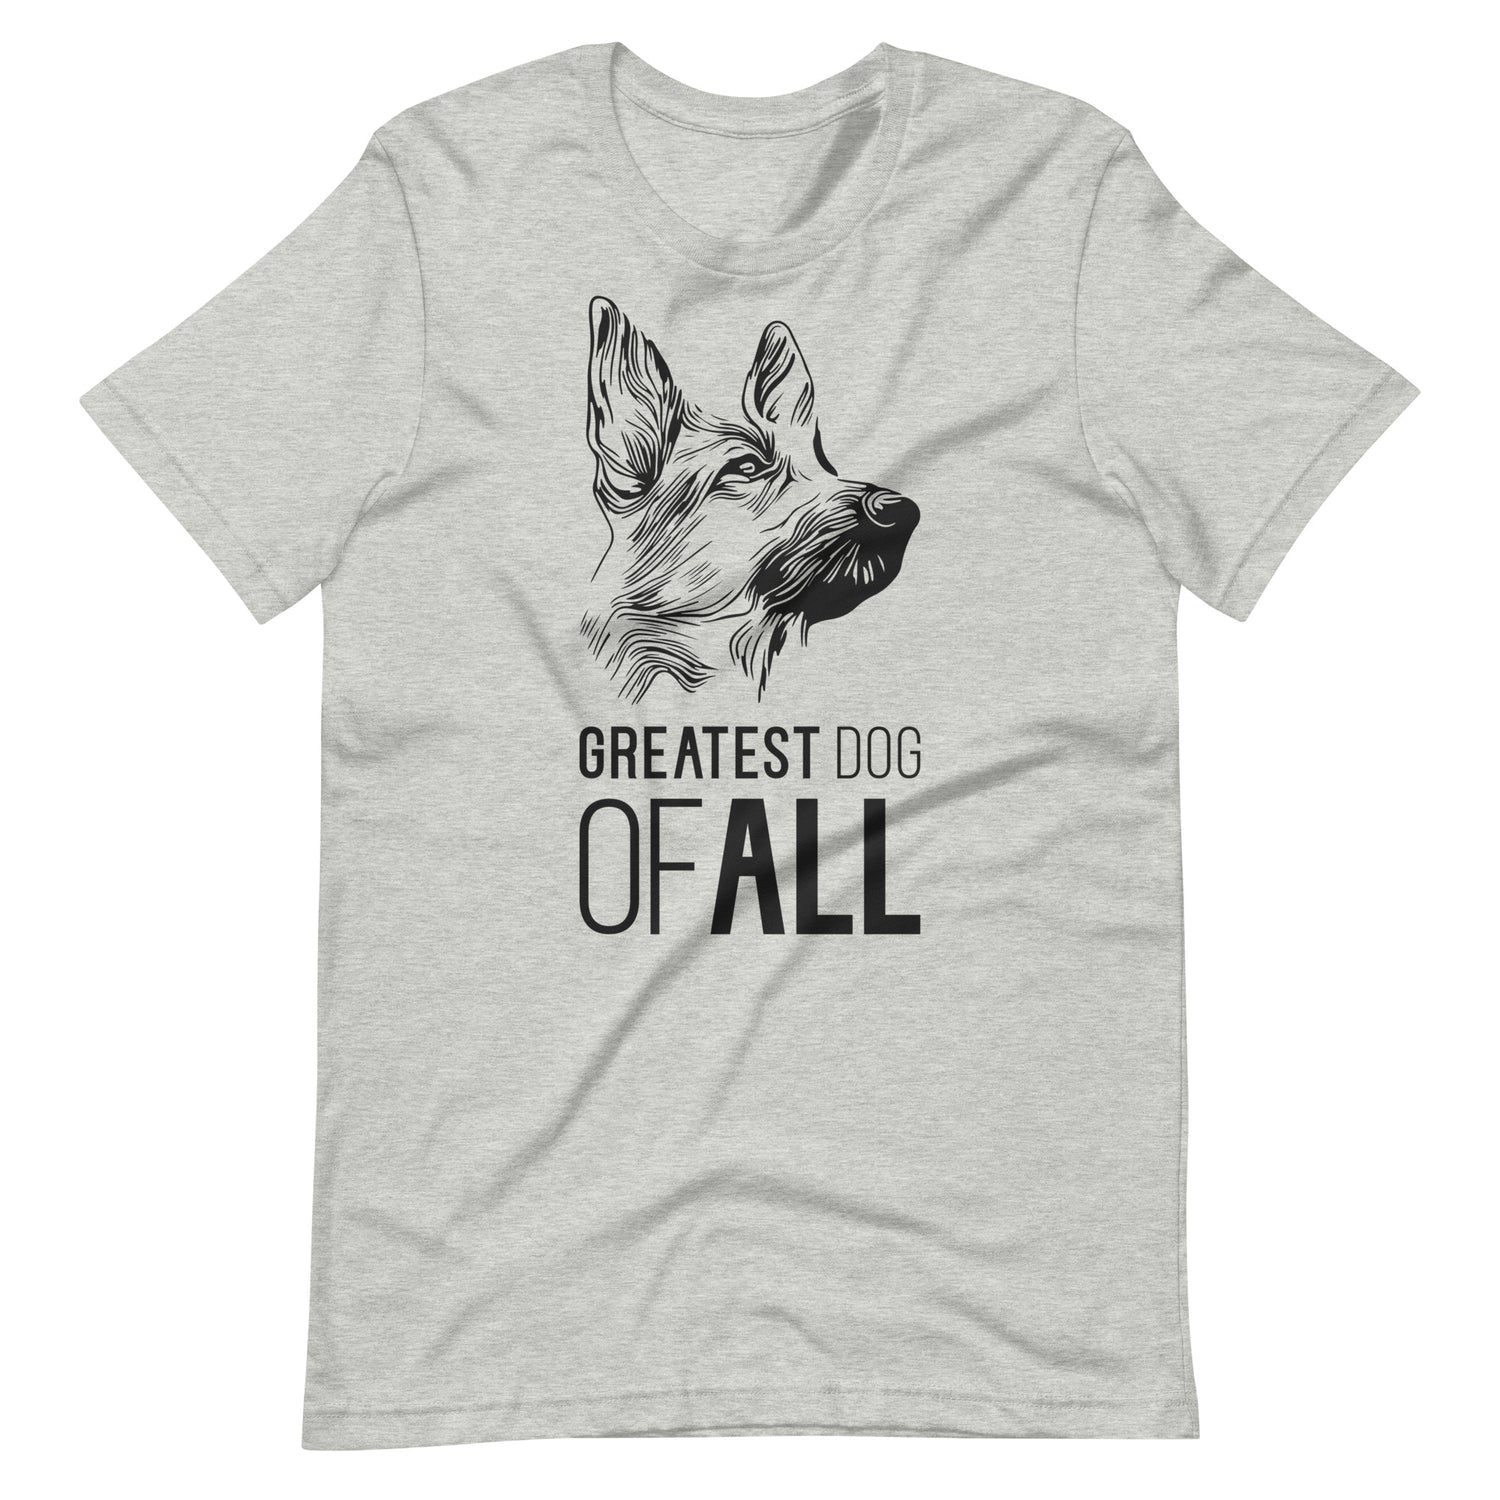 Black German Shepherd face silhouette with Greatest Dog of All caption on unisex athletic heather t-shirt